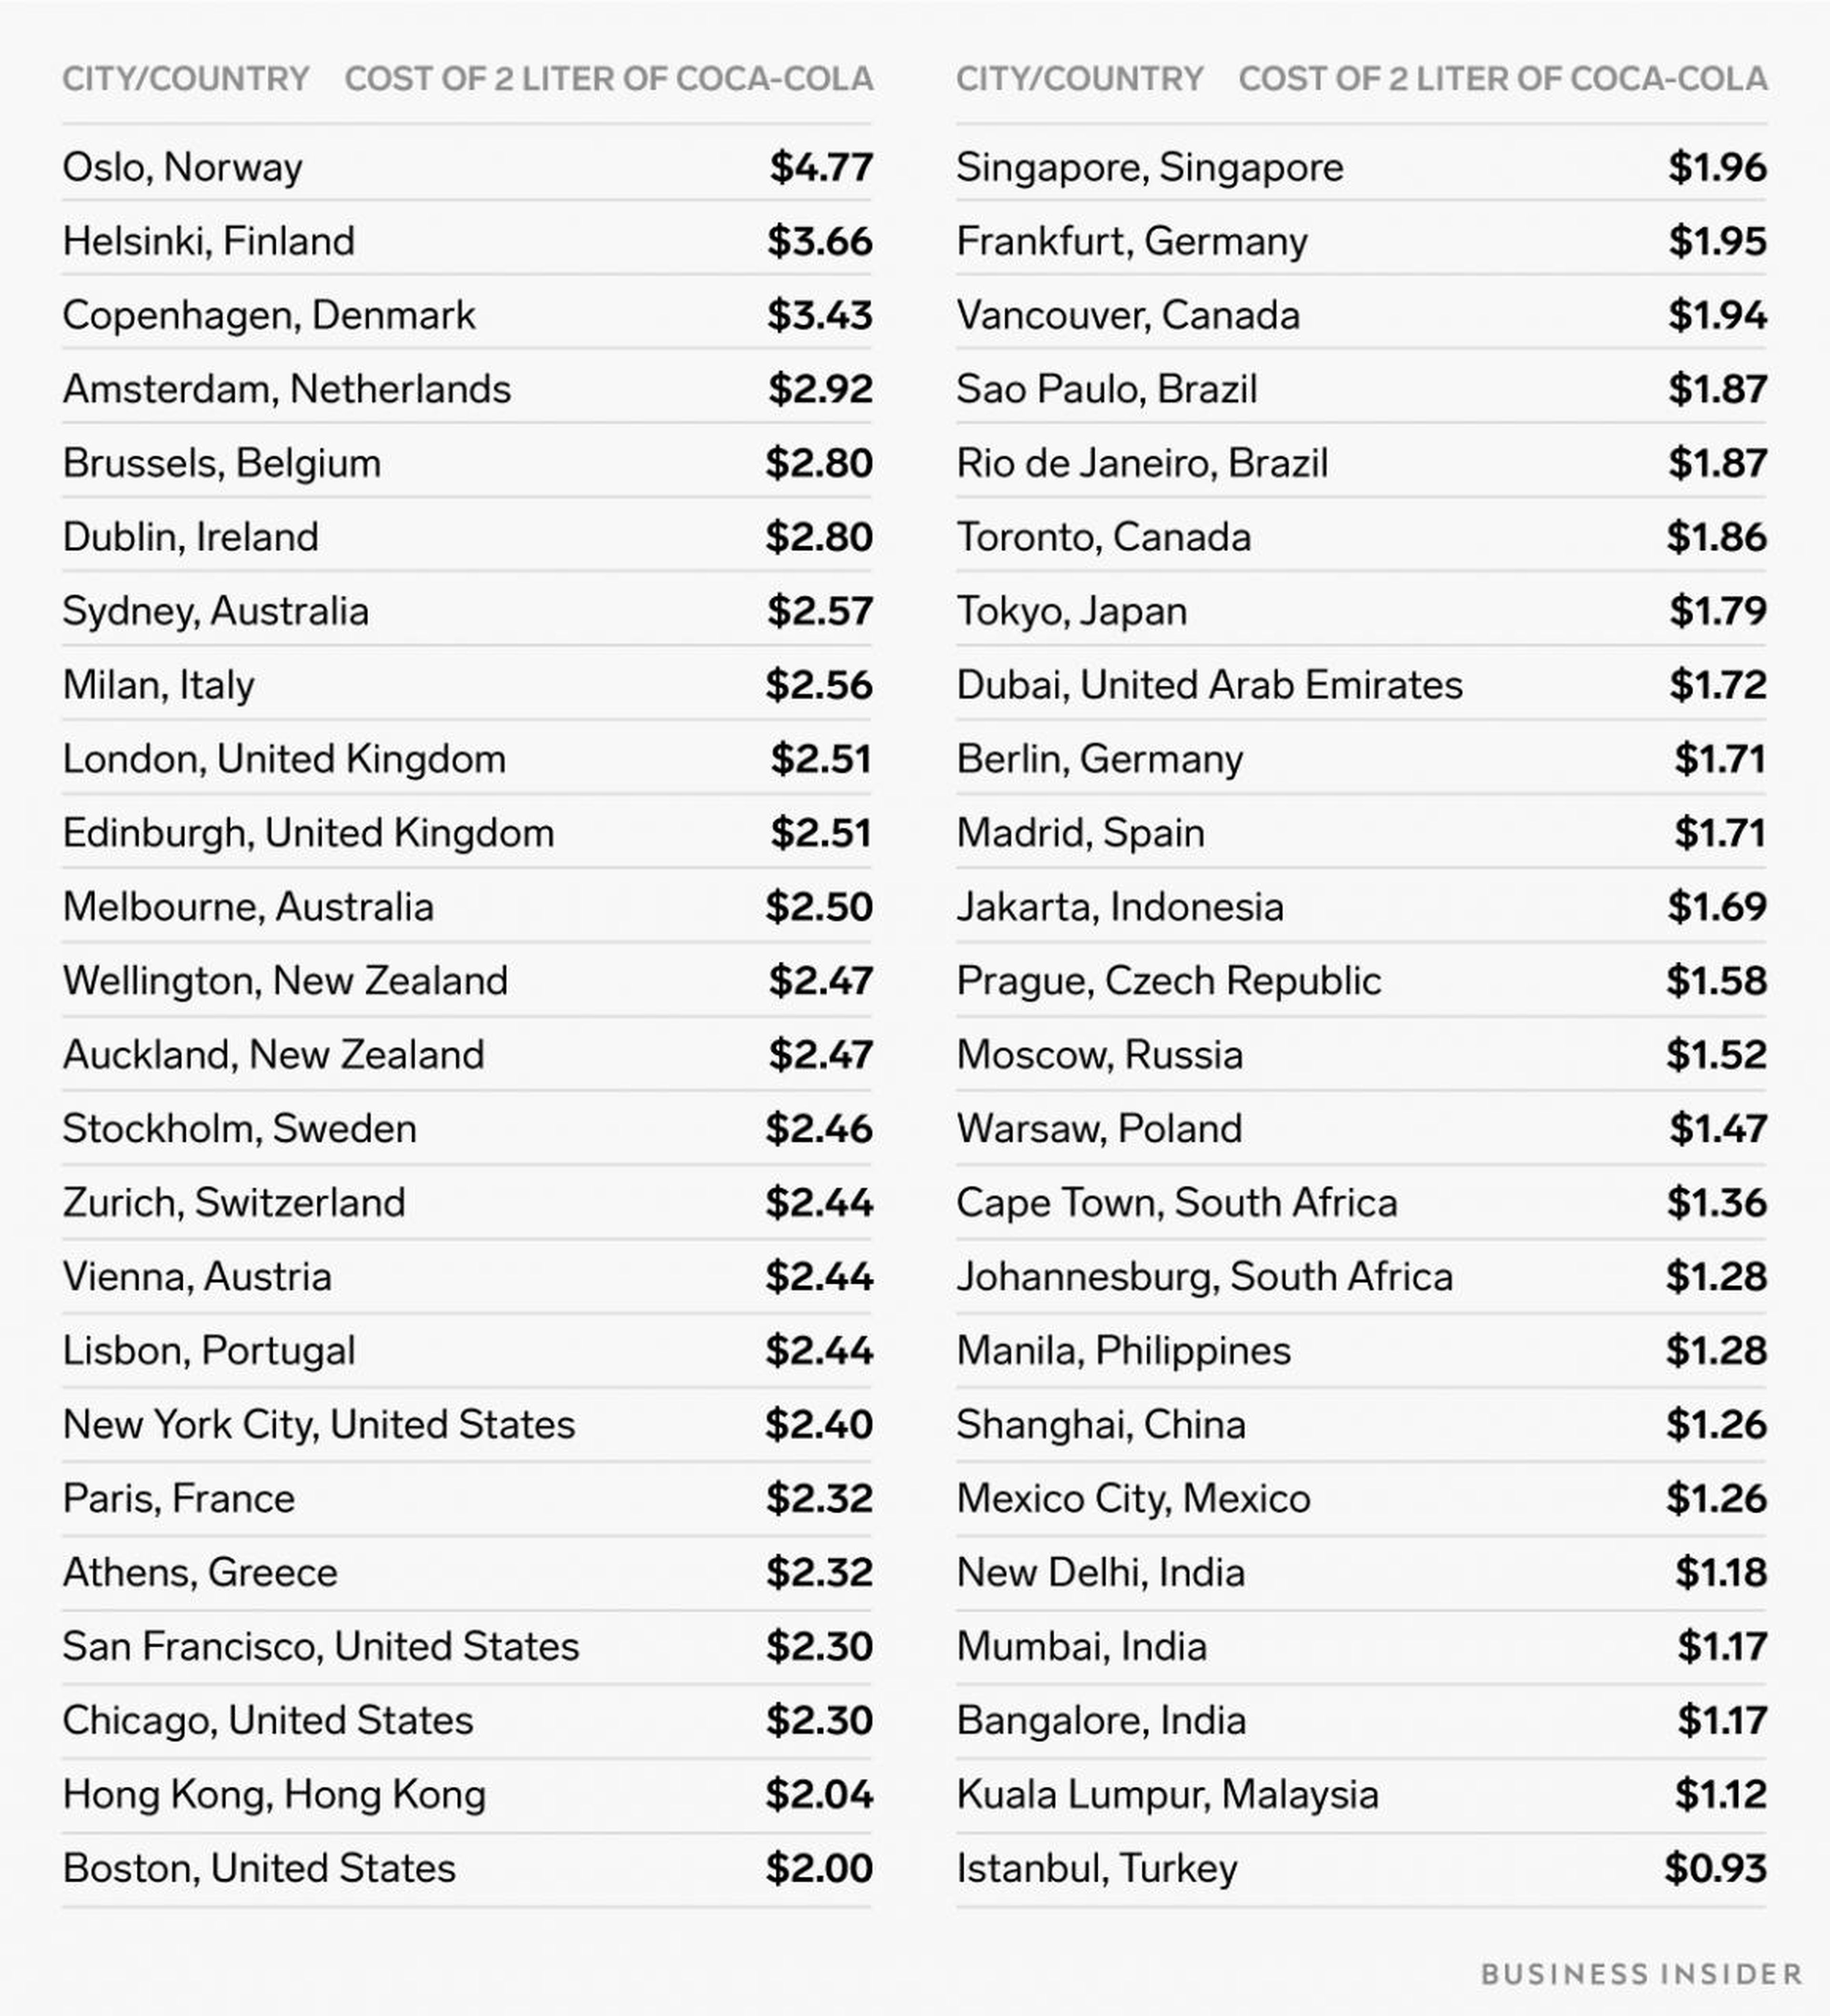 A 2-liter of Coca-Cola is most expensive in Oslo and cheapest in Istanbul.